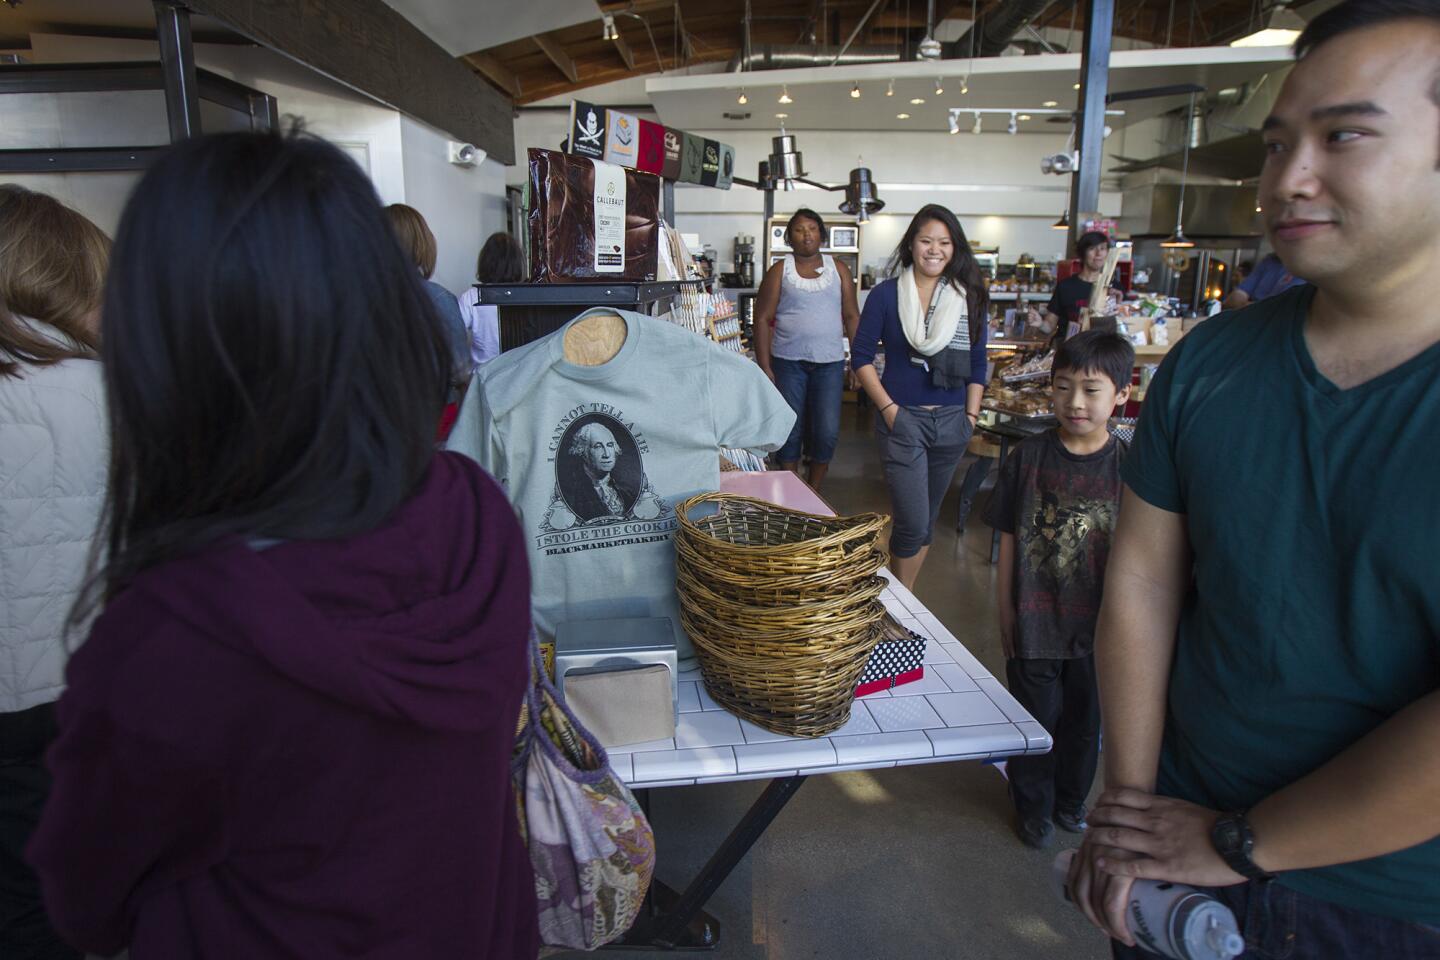 Customers participate in a cake walk, similar to musical chairs, where the winner takes home a cake a the Blackmarket Bakery open house on Saturday, January 25. The festivities are a celebration of the one-year anniversary of the bakery being at The Camp in Costa Mesa.